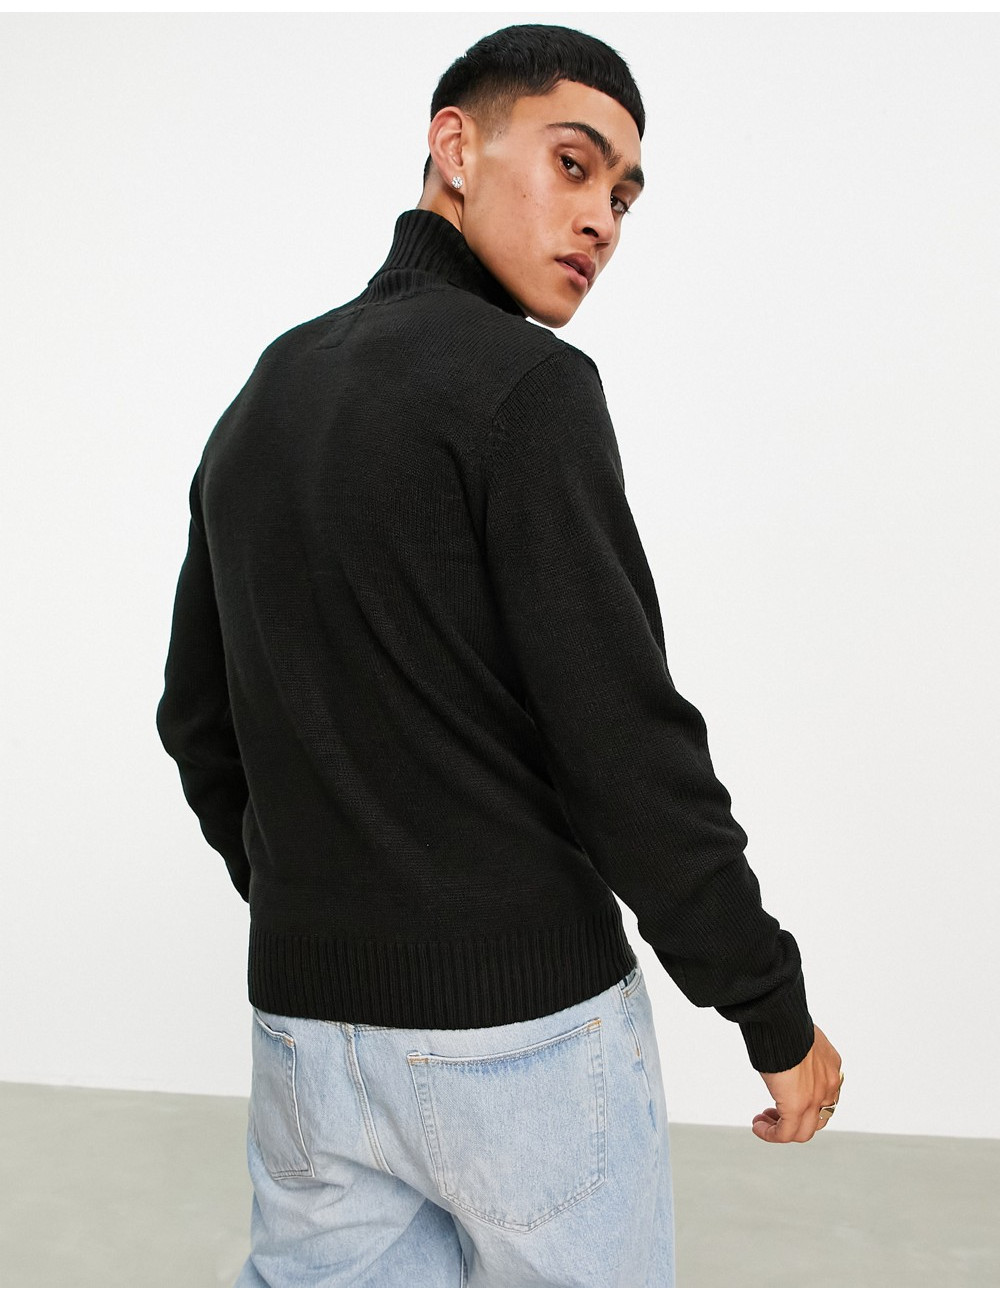 Le Breve heavy cable knit...